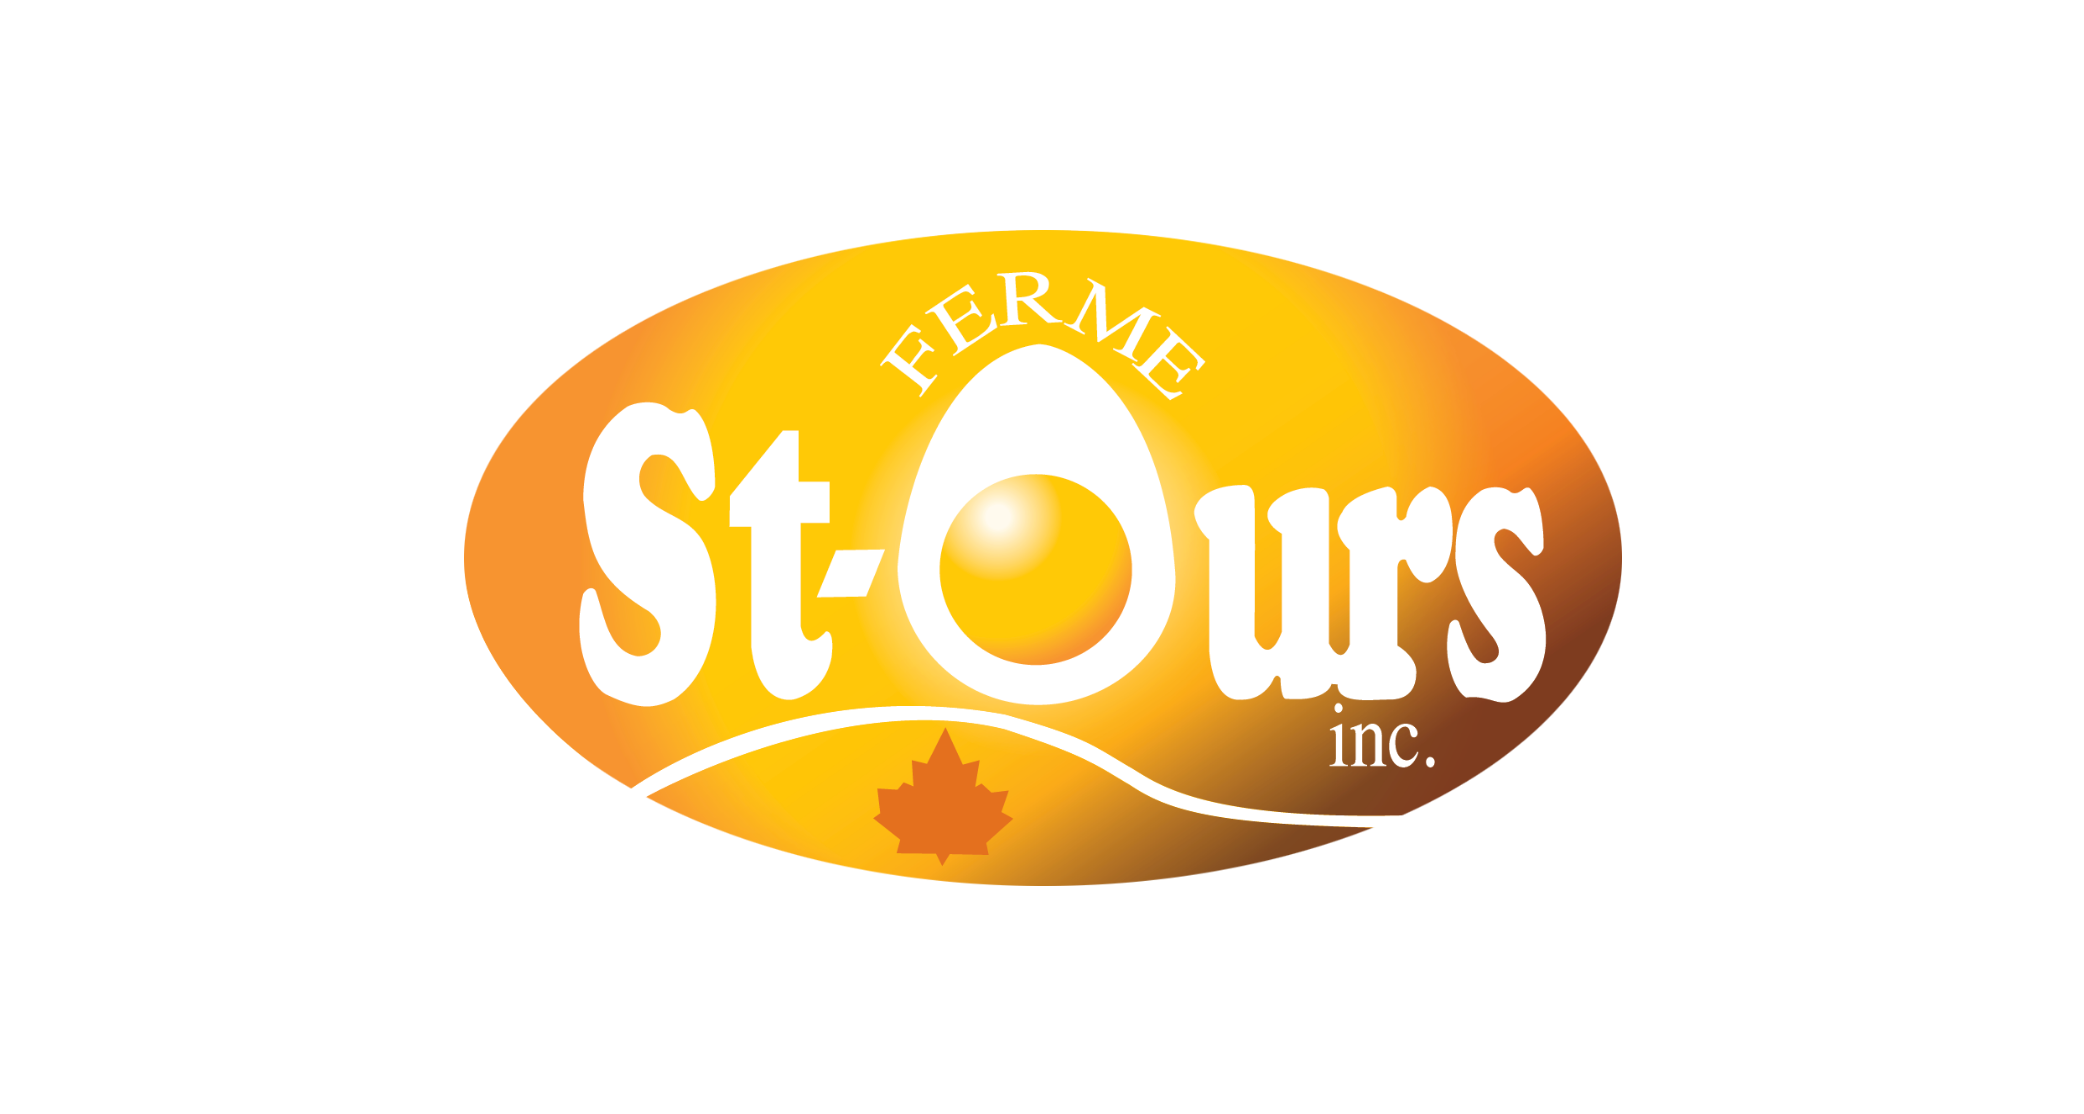 Ferme St-Ours@2x.png